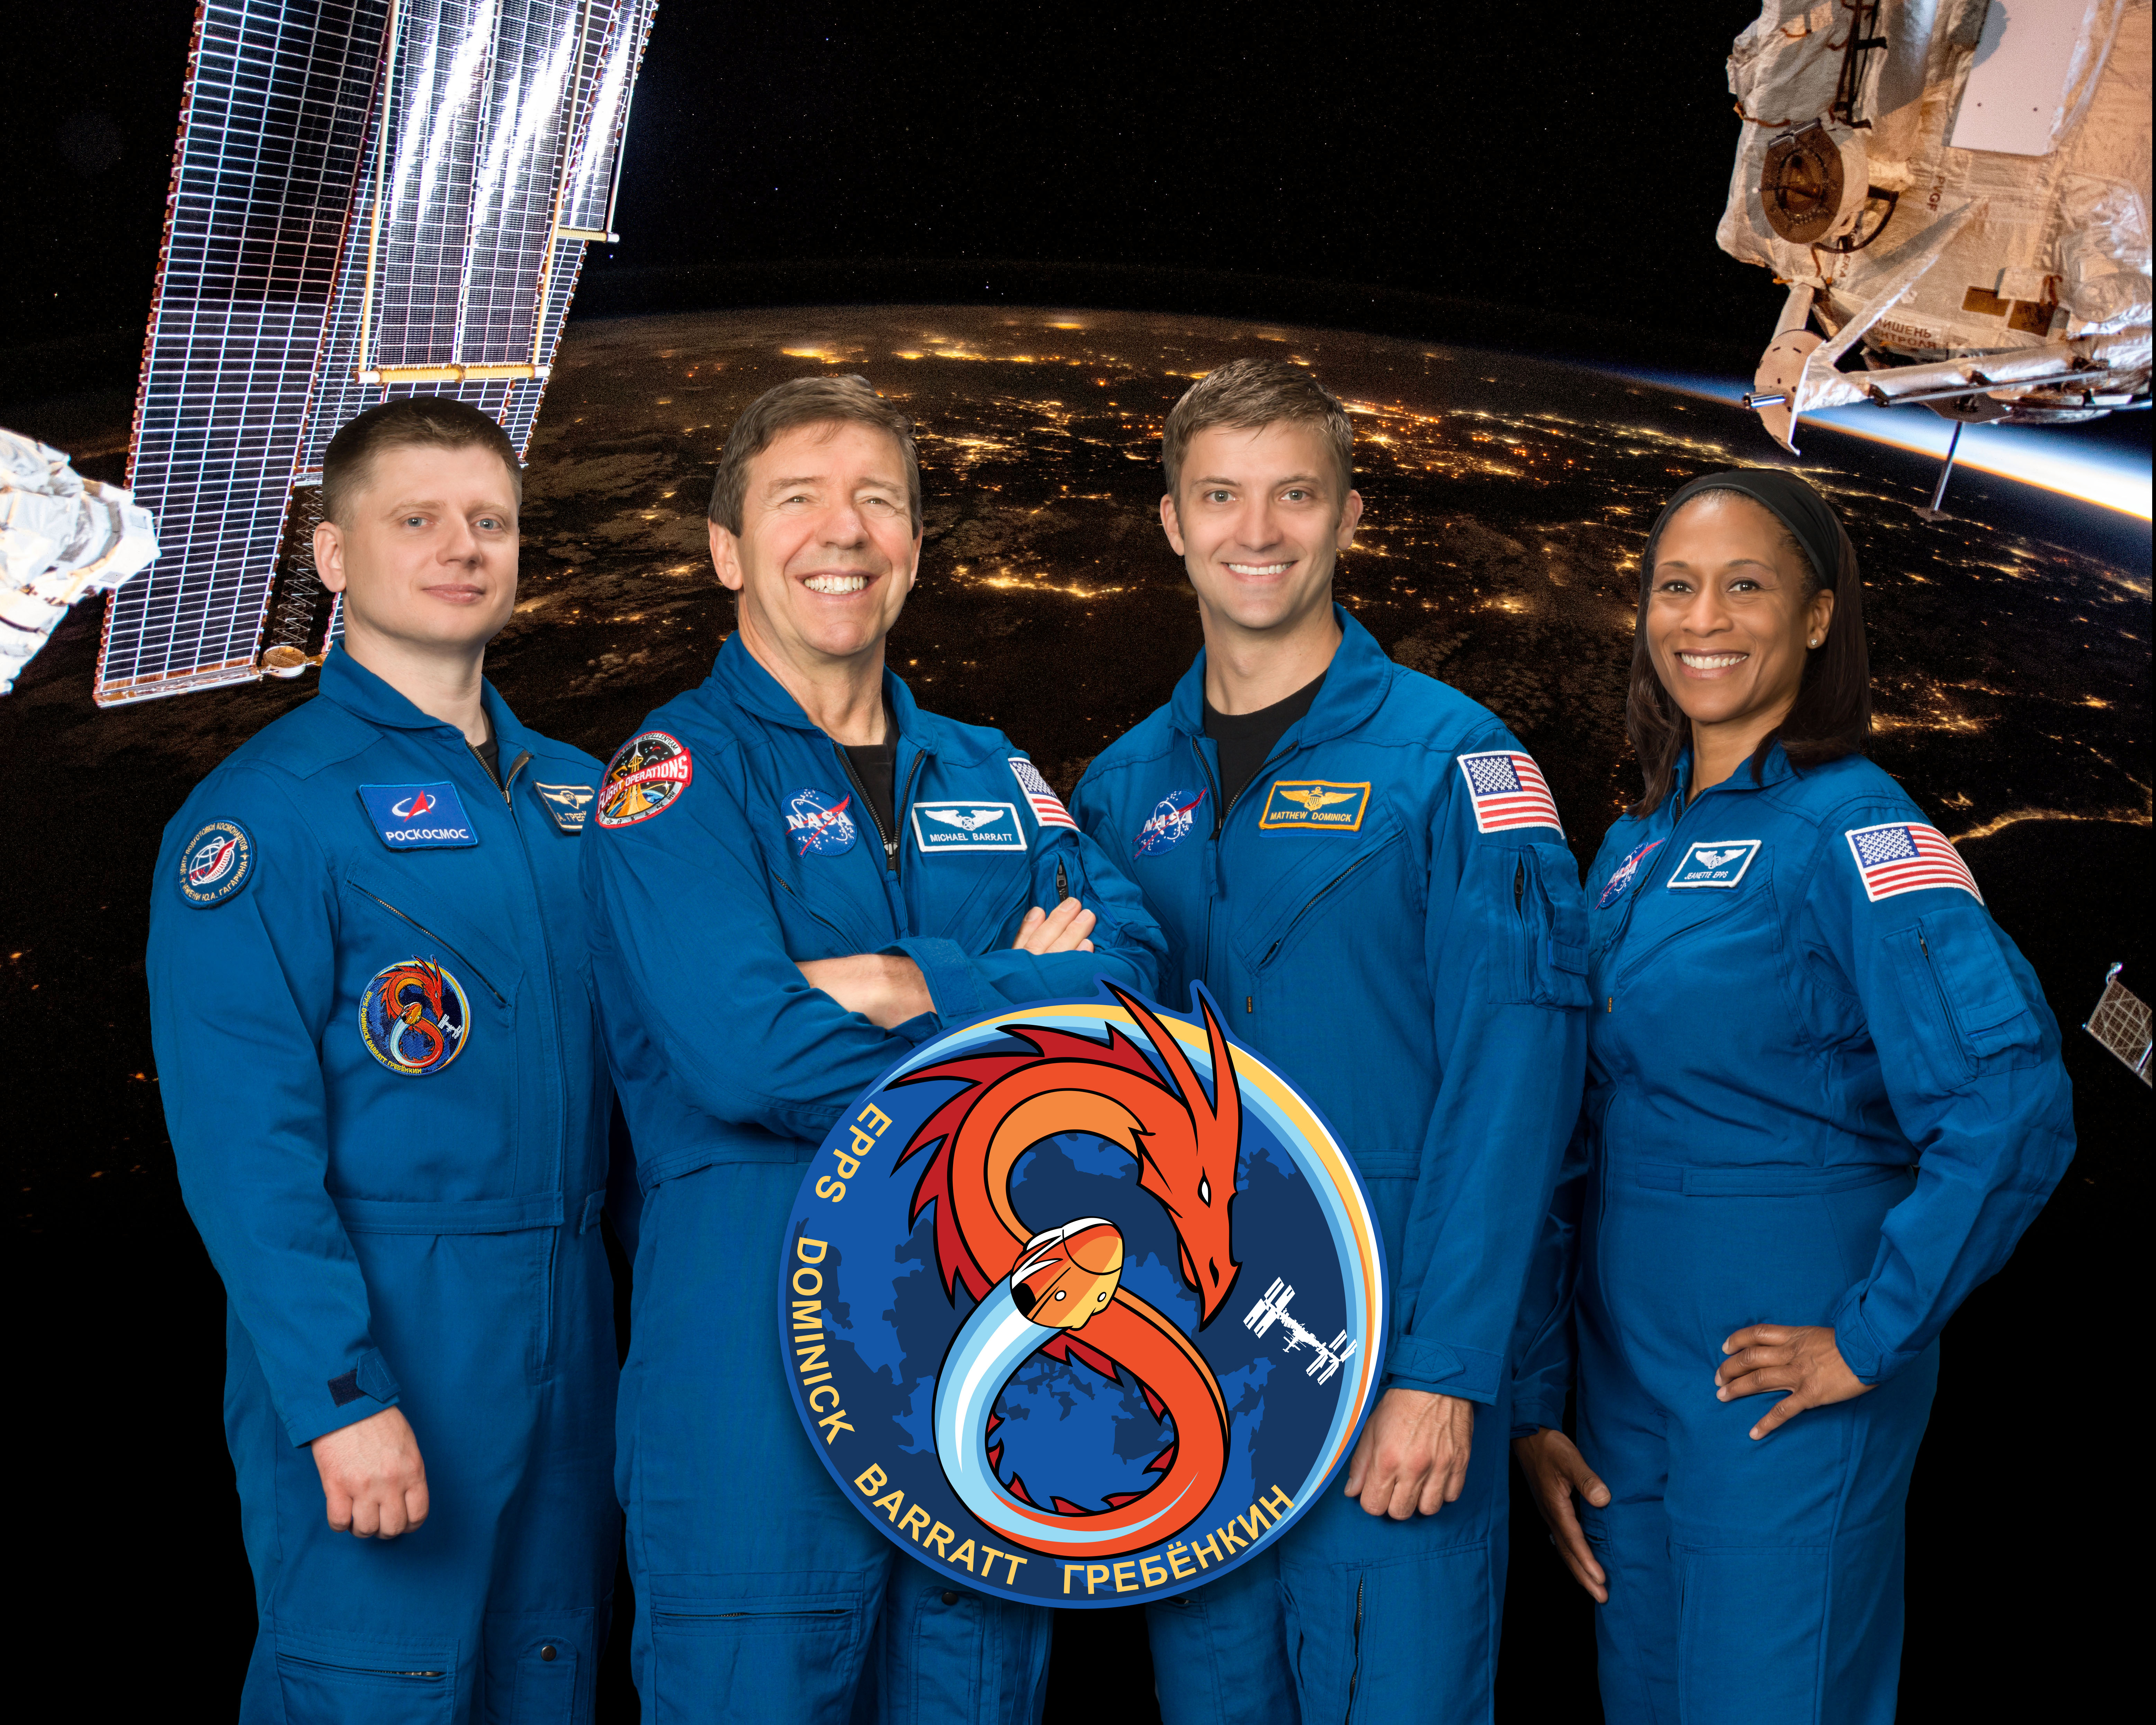 What You Need to Know about NASA’s SpaceX Crew-8 Mission